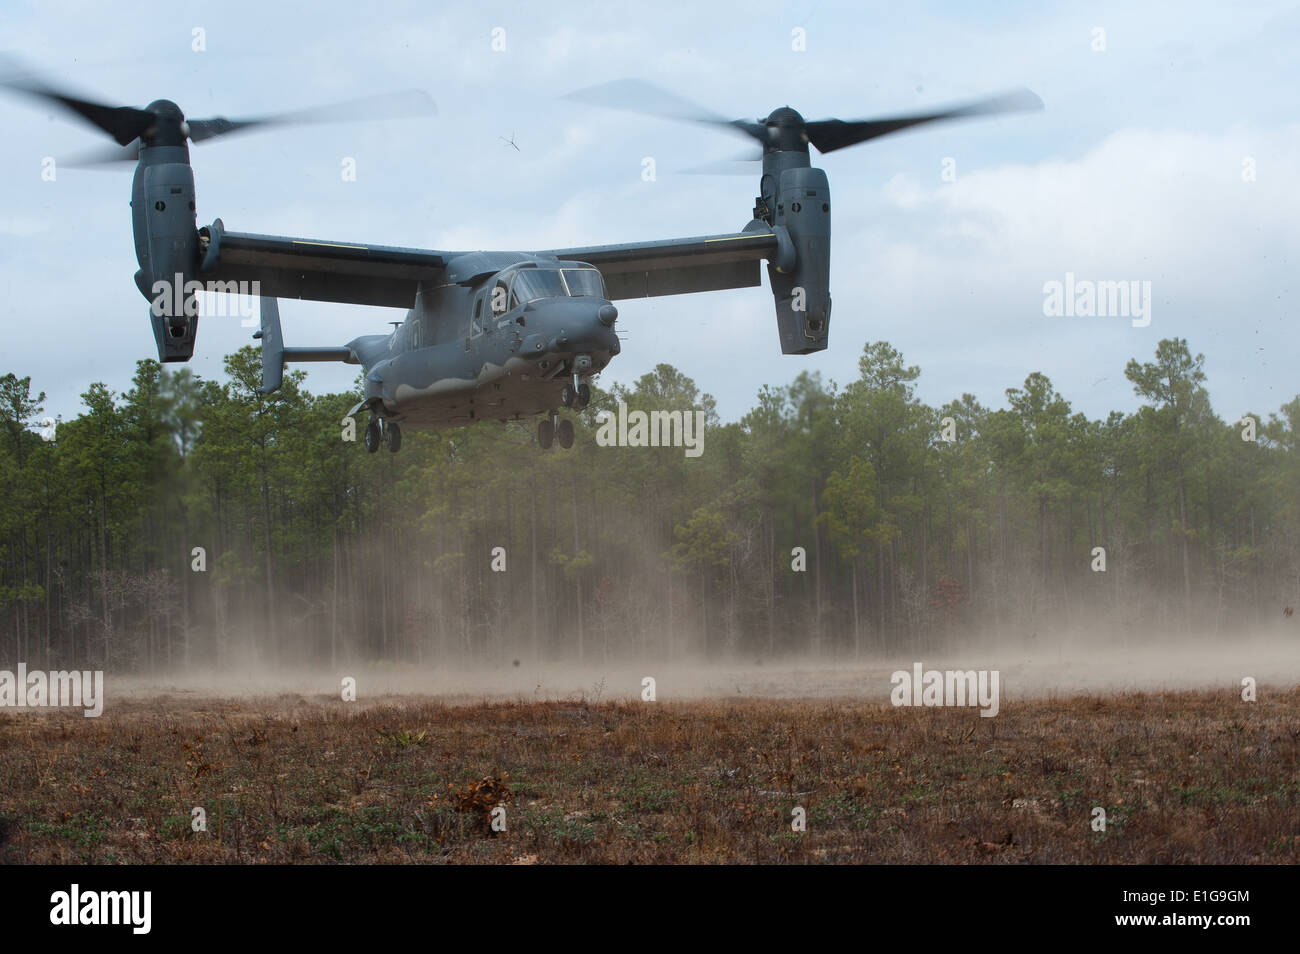 A U.S. Air Force CV-22 Osprey tilt-rotor aircraft from the 8th Special Operations Squadron 'Black Birds' lands during a local t Stock Photo